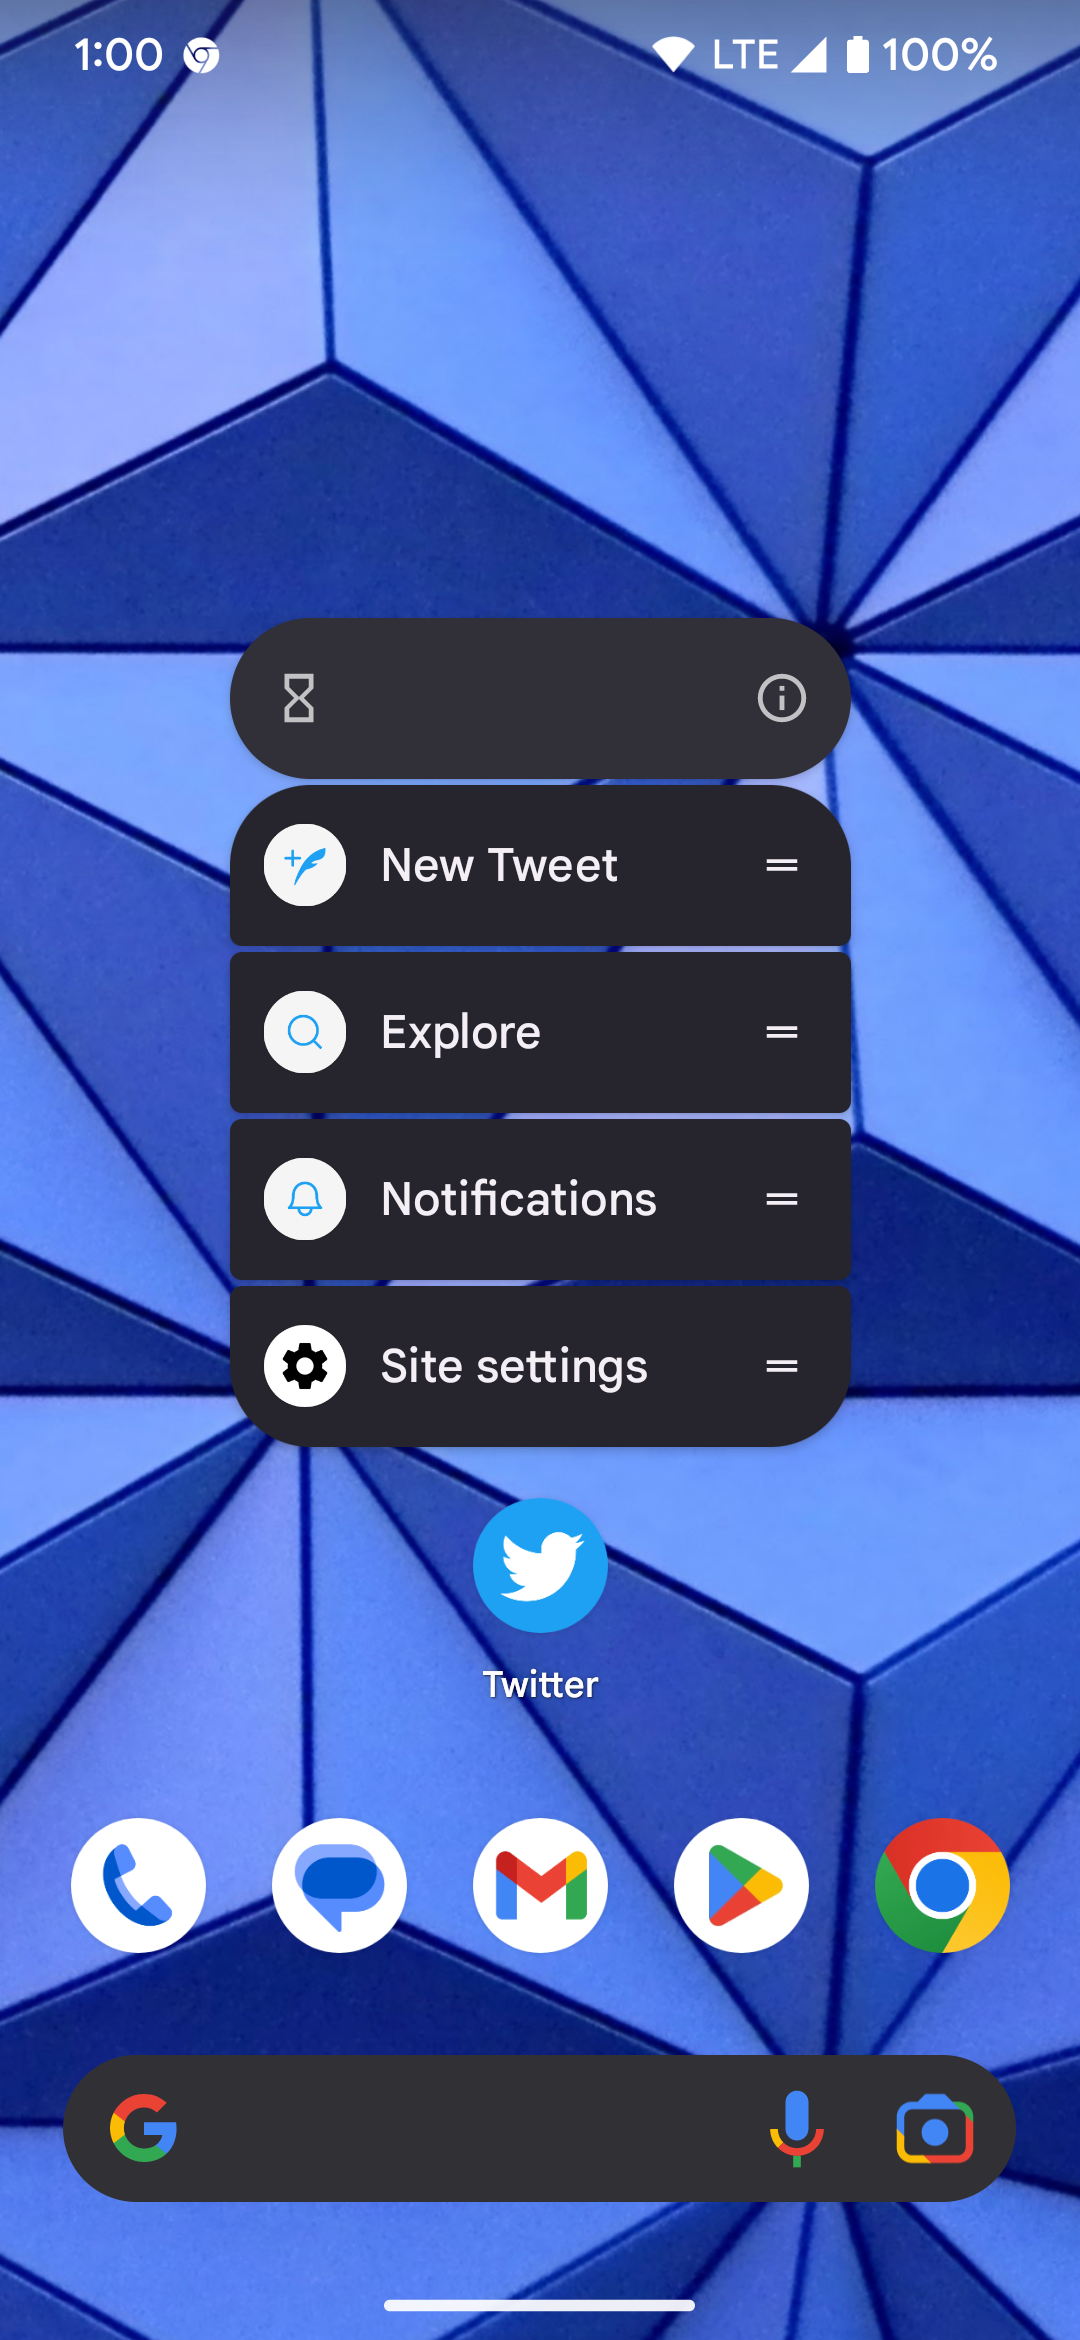 An example of the long-press icon options on the home screen for the Twitter web app